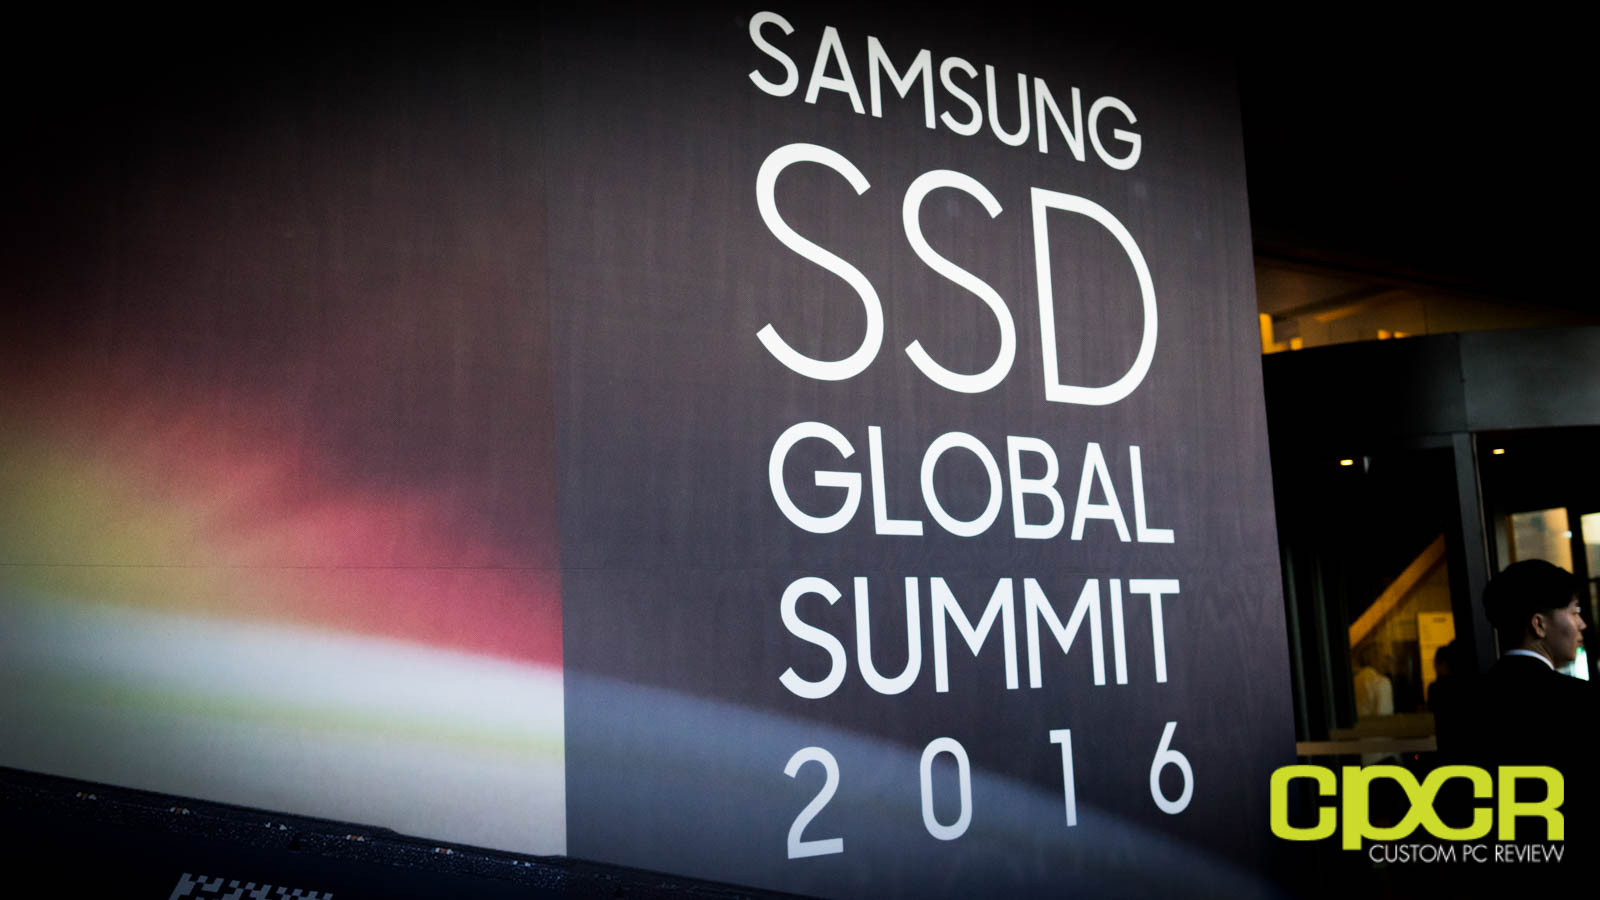 Samsung 960 EVO, PRO Banner Spotted Before 2016 Samsung SSD Global Summit